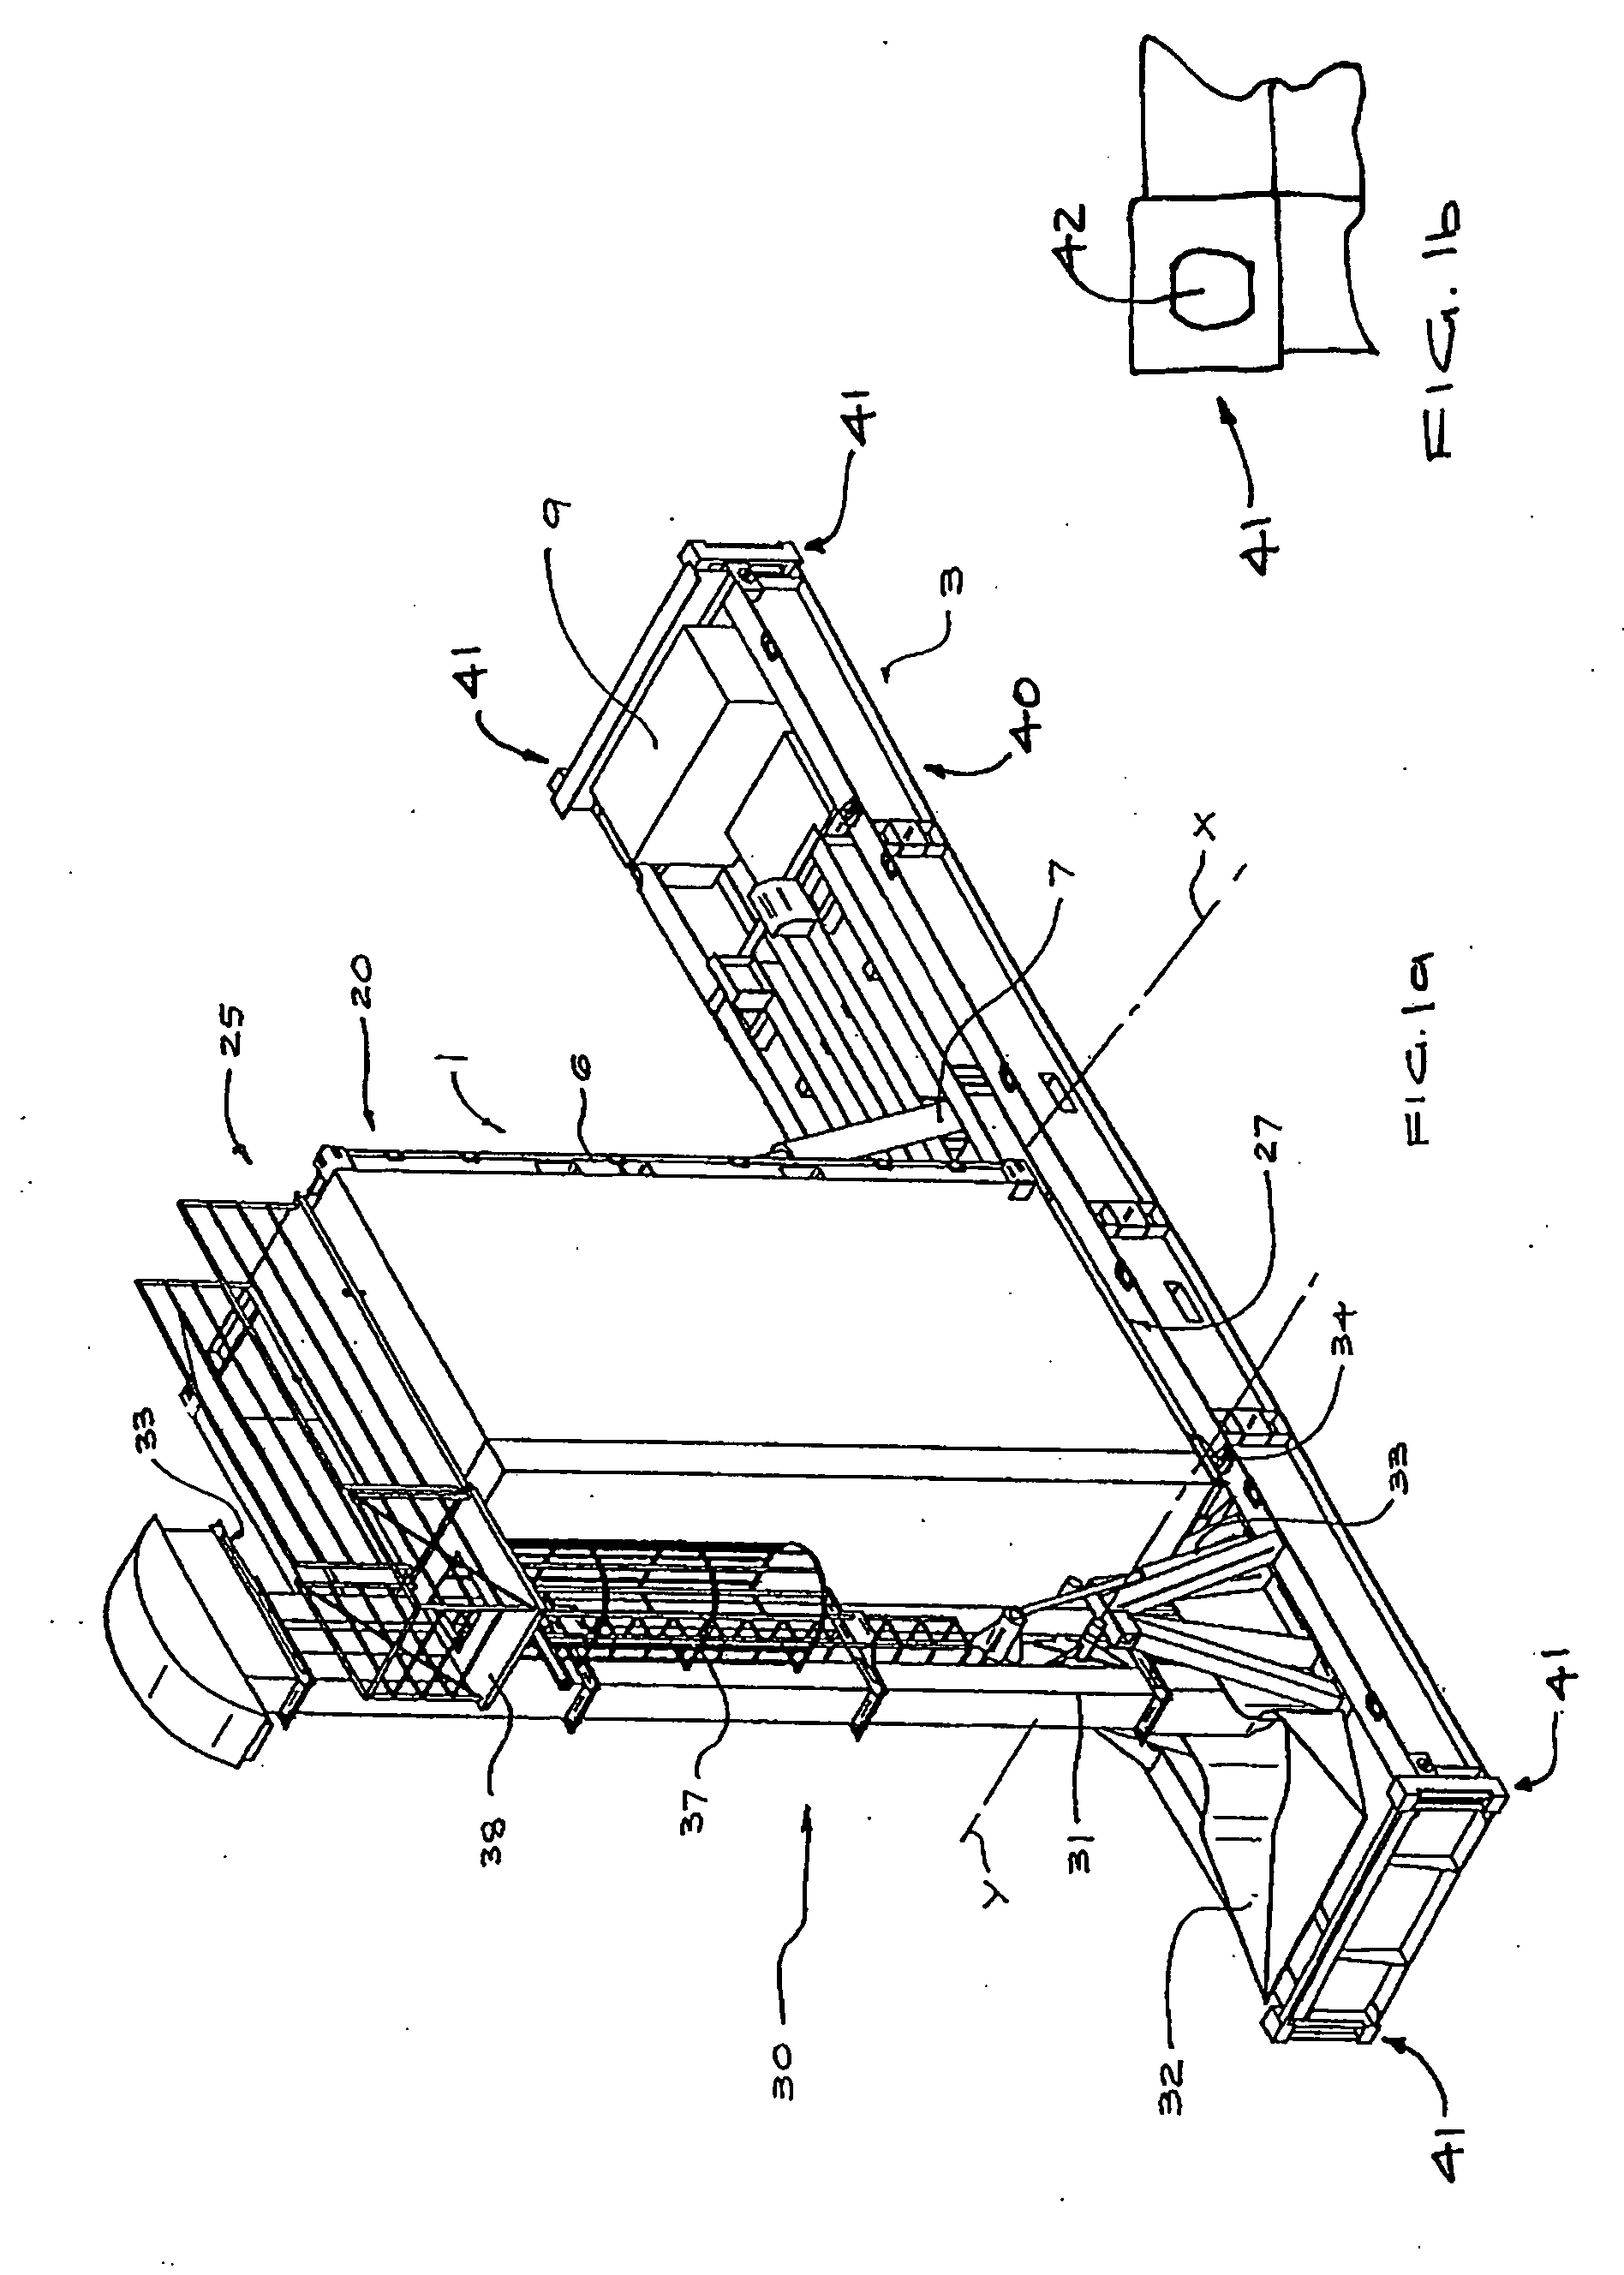 Portable tilting container loader